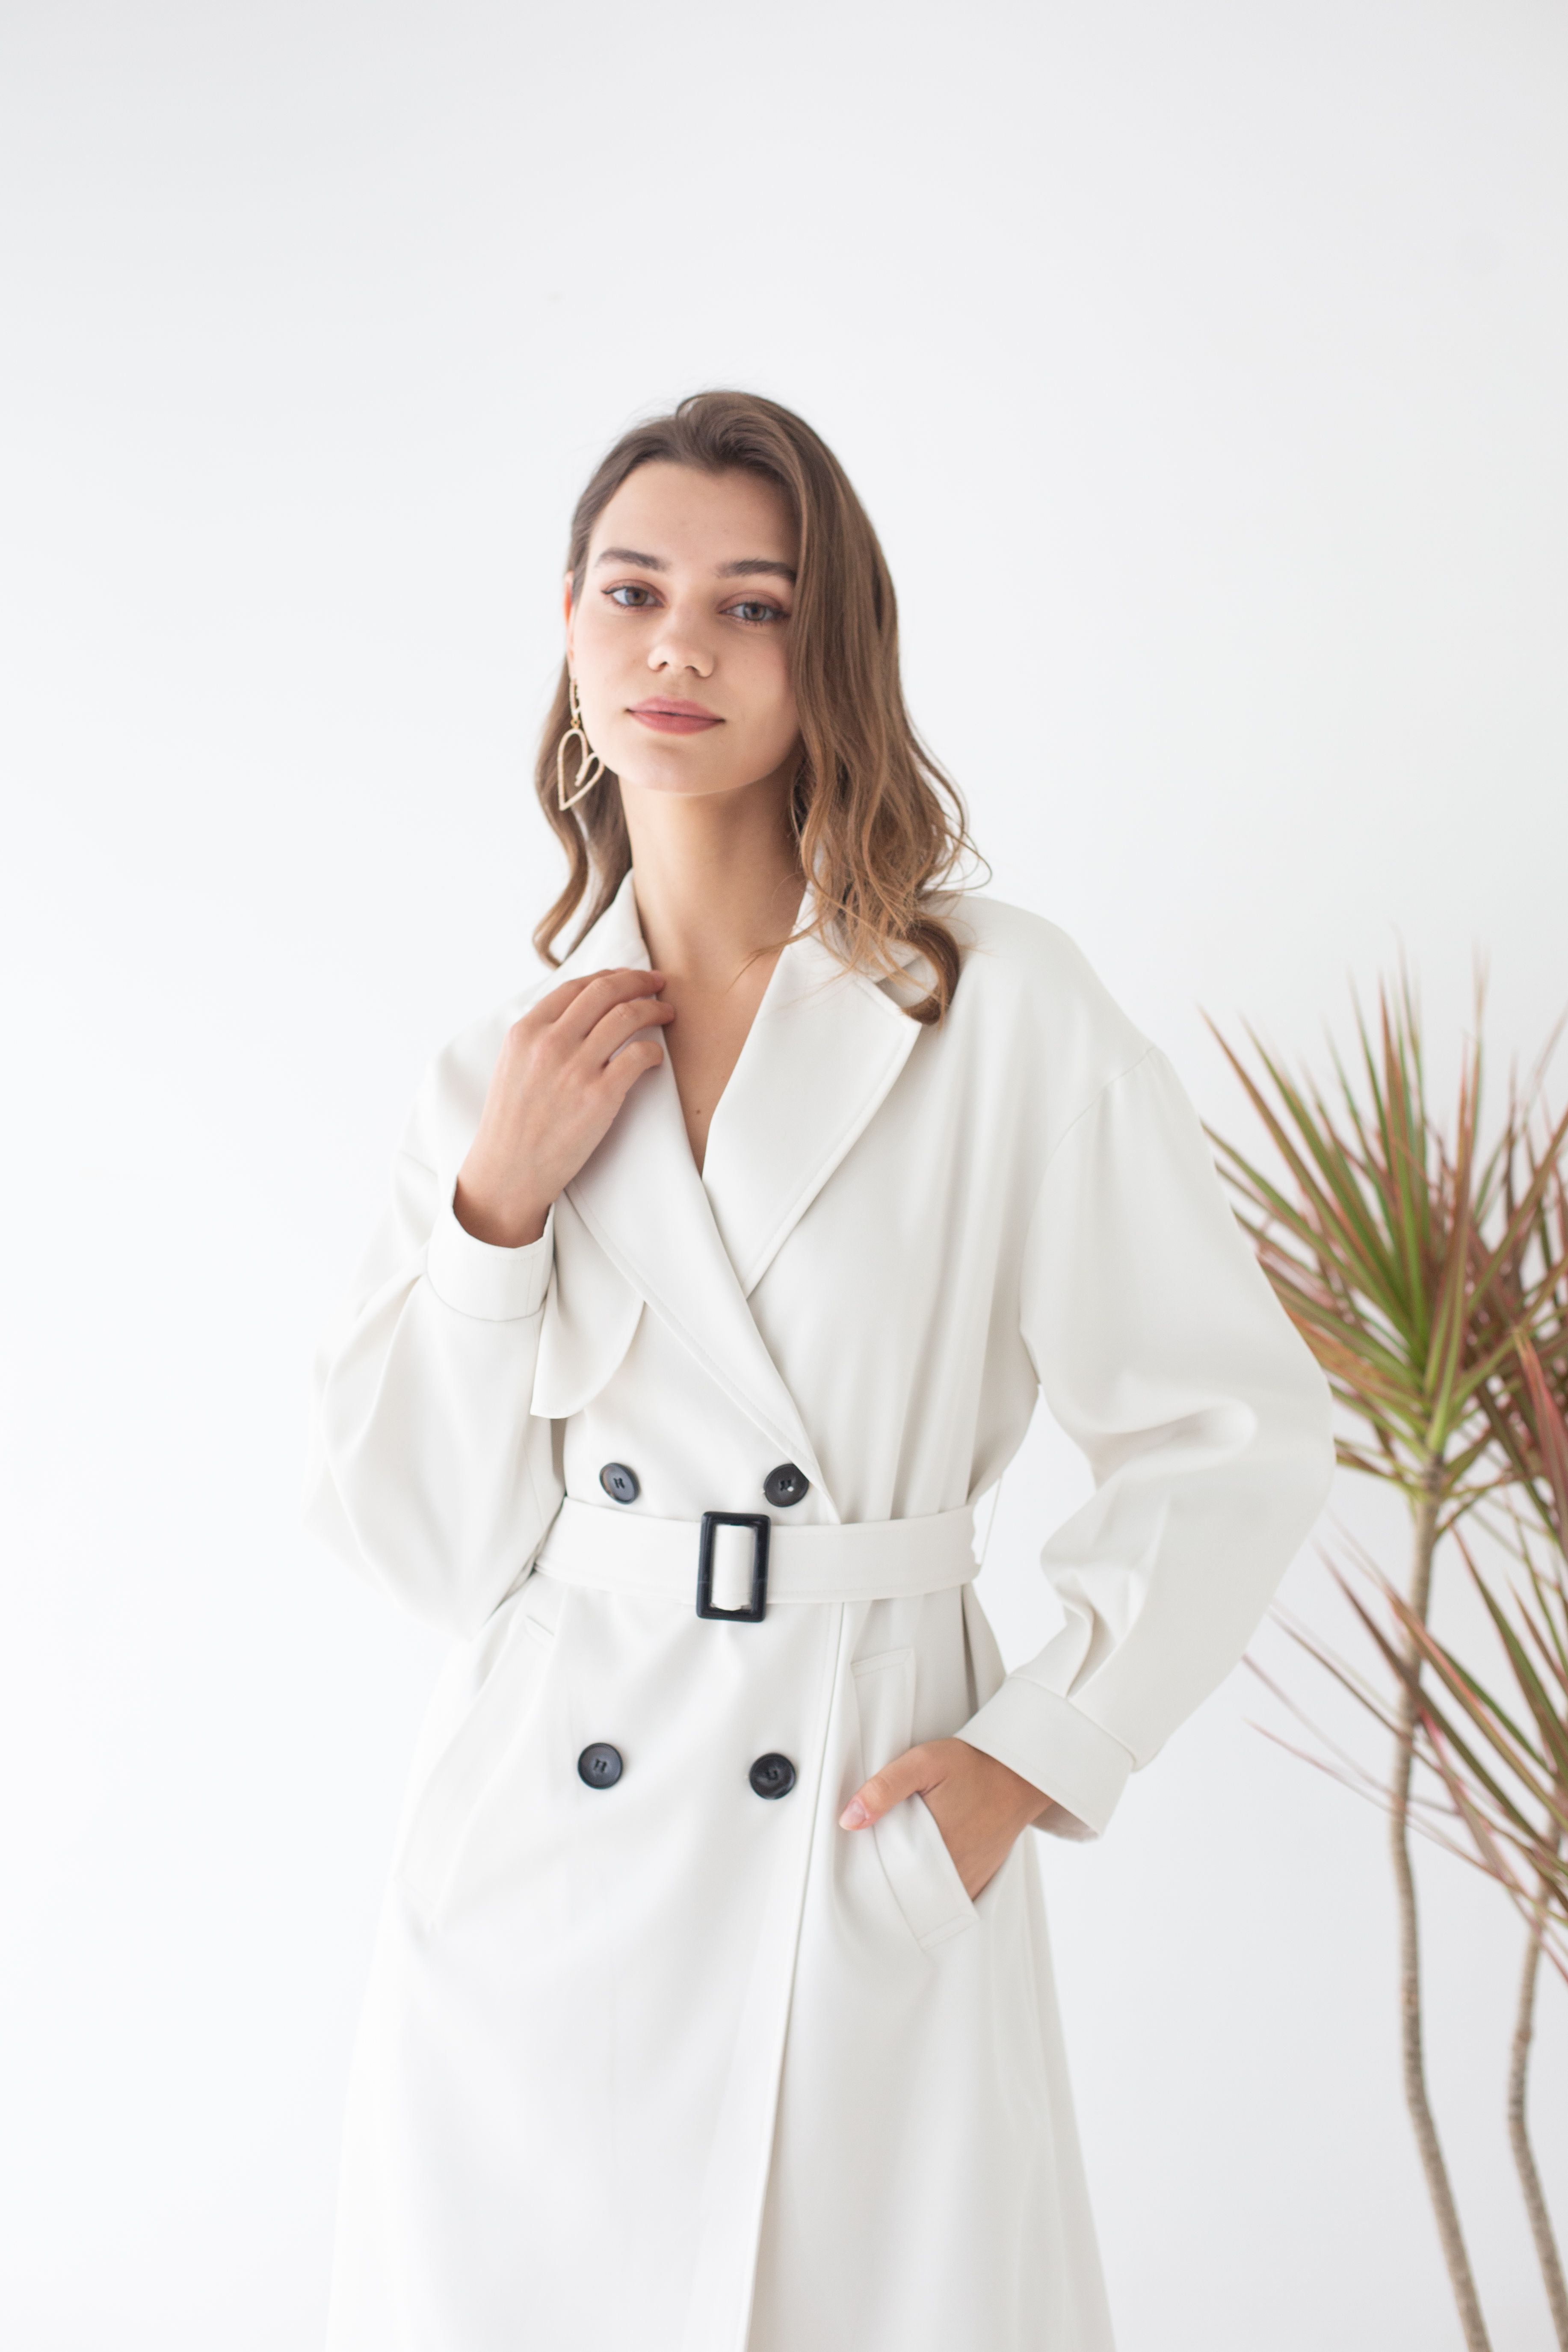 Bubble Sleeve Belted Trench Coat in Ivory